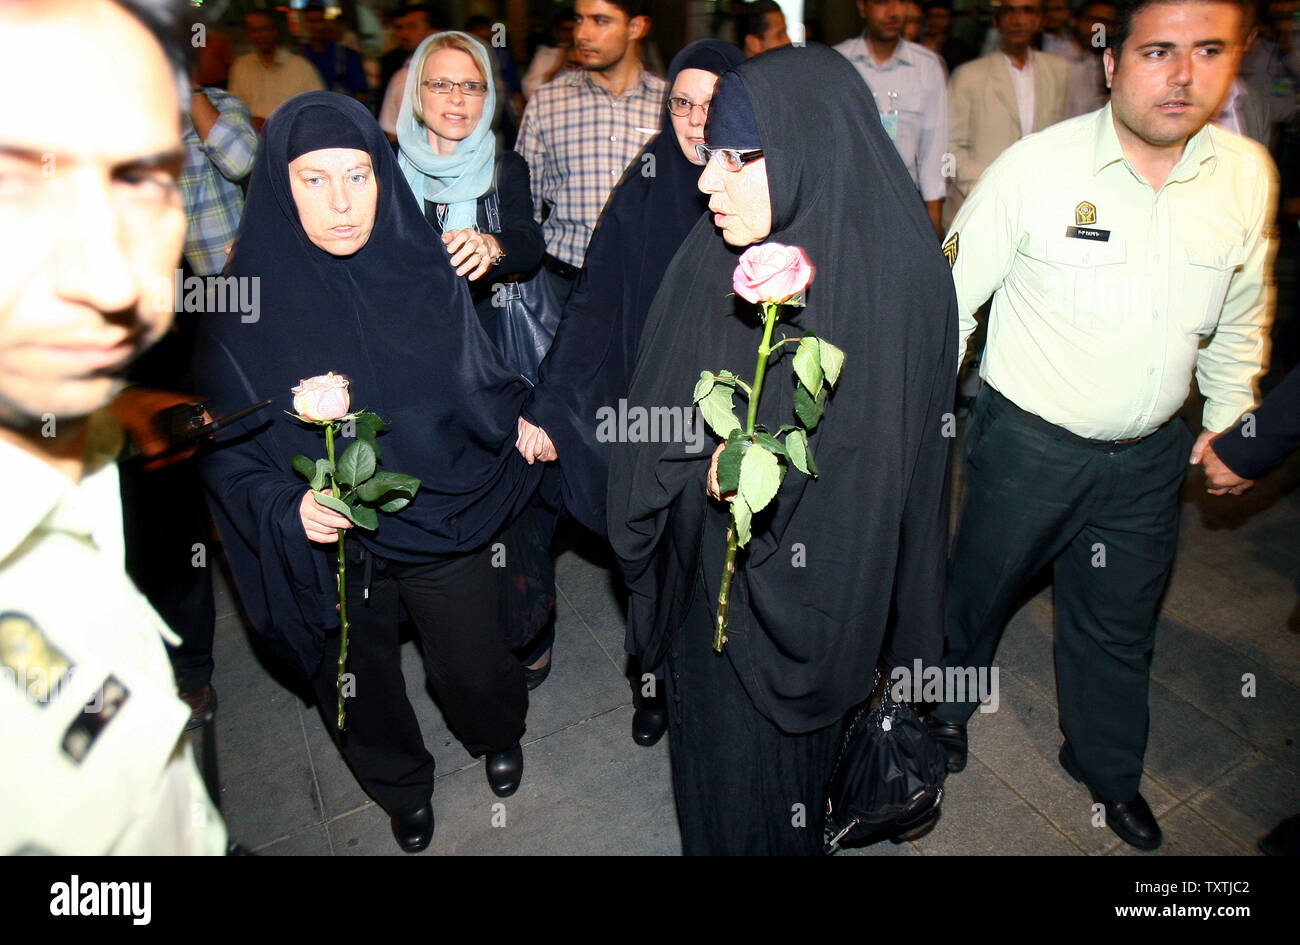 Cindy Hickey (L-R), Nora Shroud, and Laura Fattal walk with Swiss Ambassador to Iran Livia Leu Agosti, (blue hijab) at Imam Khomeini Airport in Tehran, Iran on May 19, 2010 after arriving to visit their children. Shane Bauer, 27, Sarah Shourd, 31, and Josh Fattal, 27, were detained on July 31,2009 after straying across Iran's border while on a hiking trip in northern Iraq's Kurdistan region.       UPI/Maryam Rahmanian Stock Photo